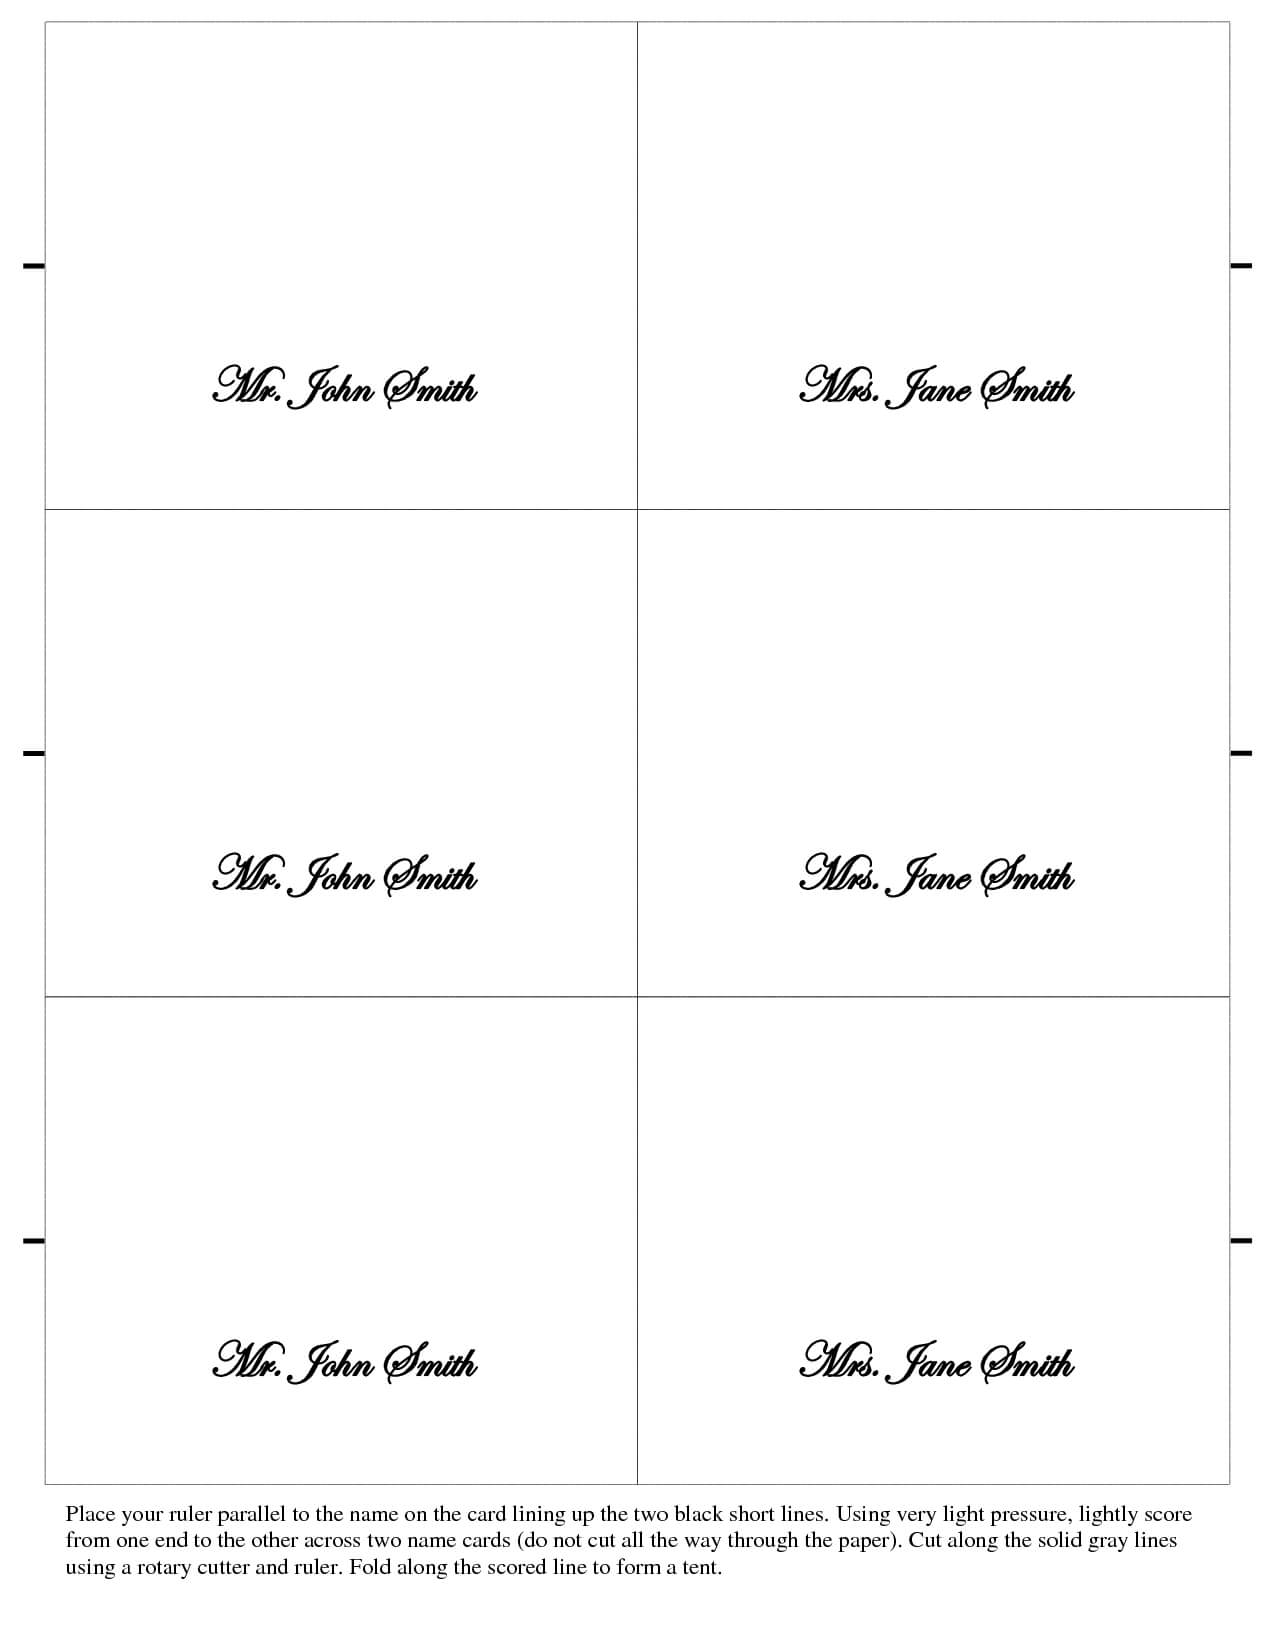 011 Place Card Template Free Magnificent Ideas Business For Free Place Card Templates Download